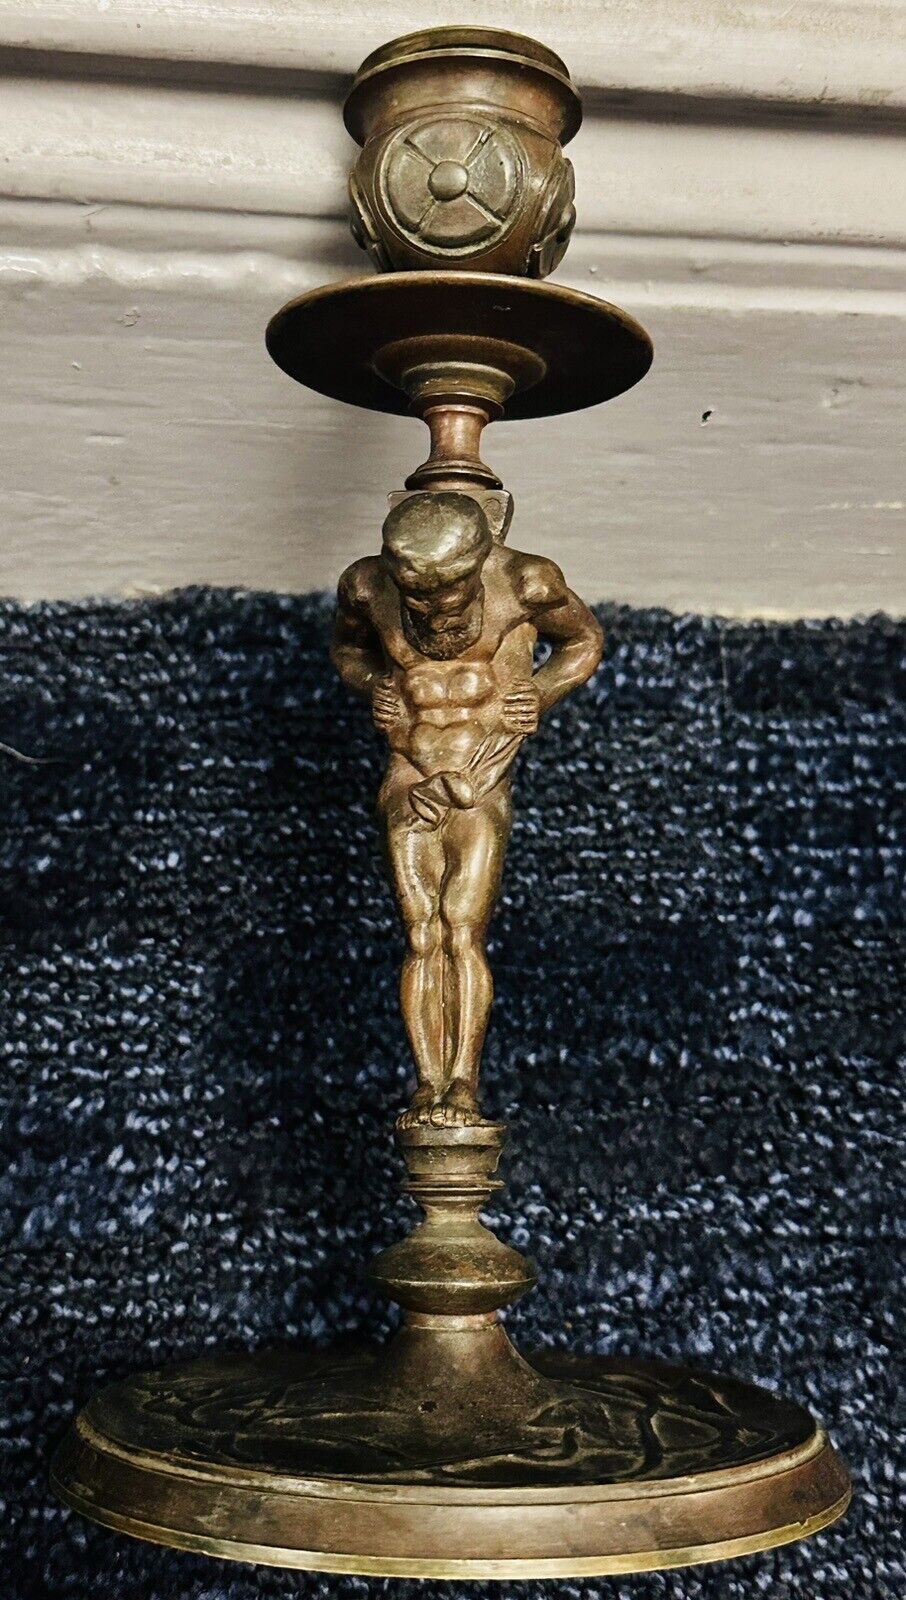 8” Tall Bronze Statue Man Holding Candlestick On His Back